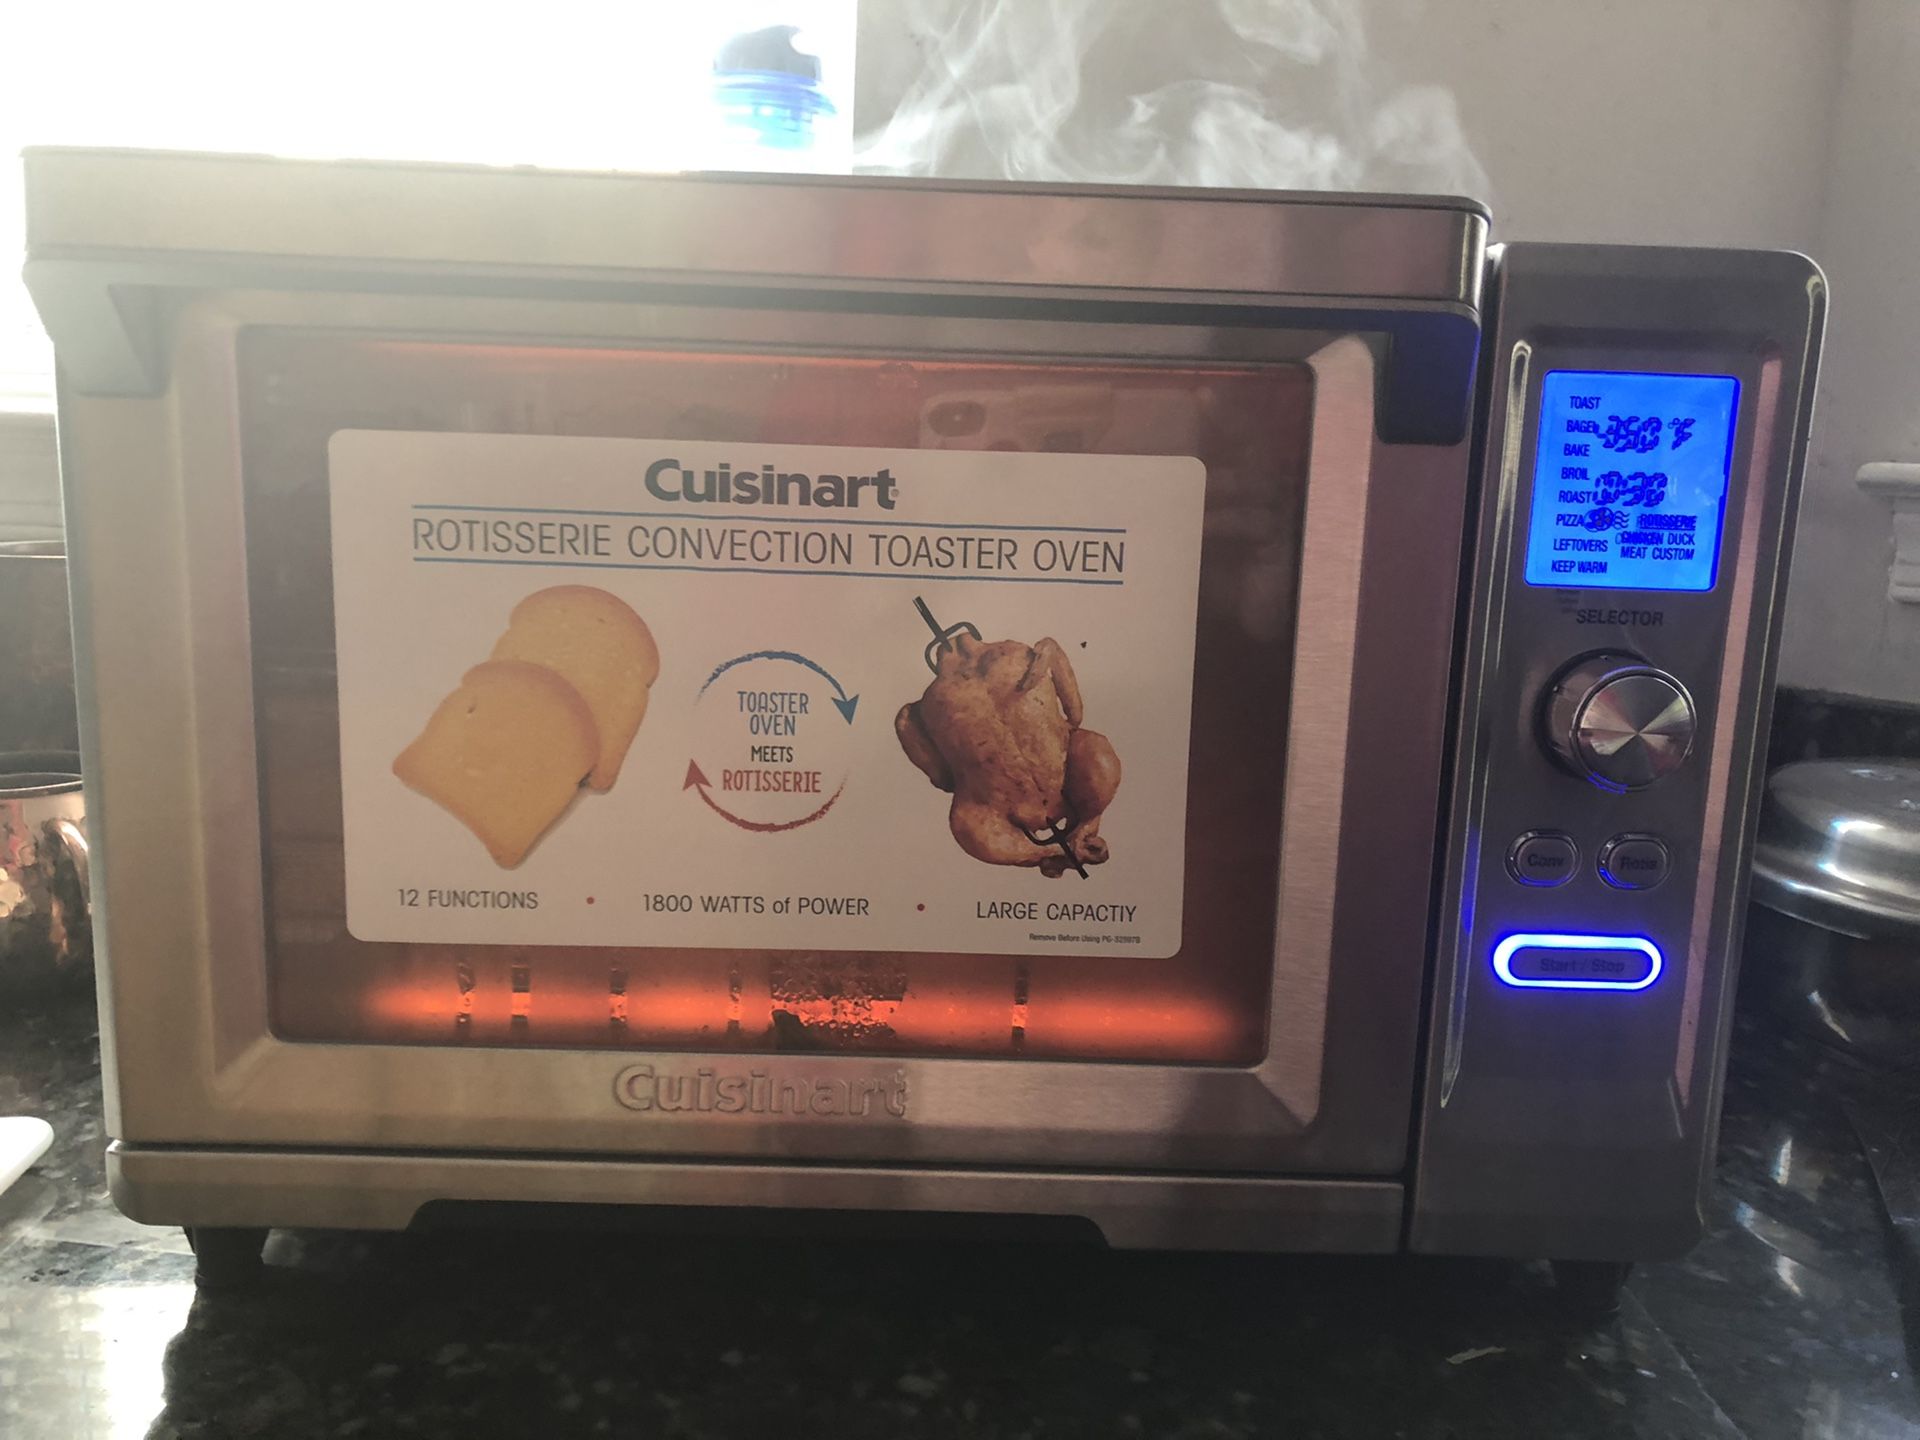 Cuisinart Rotisserie Convection Oven used ones